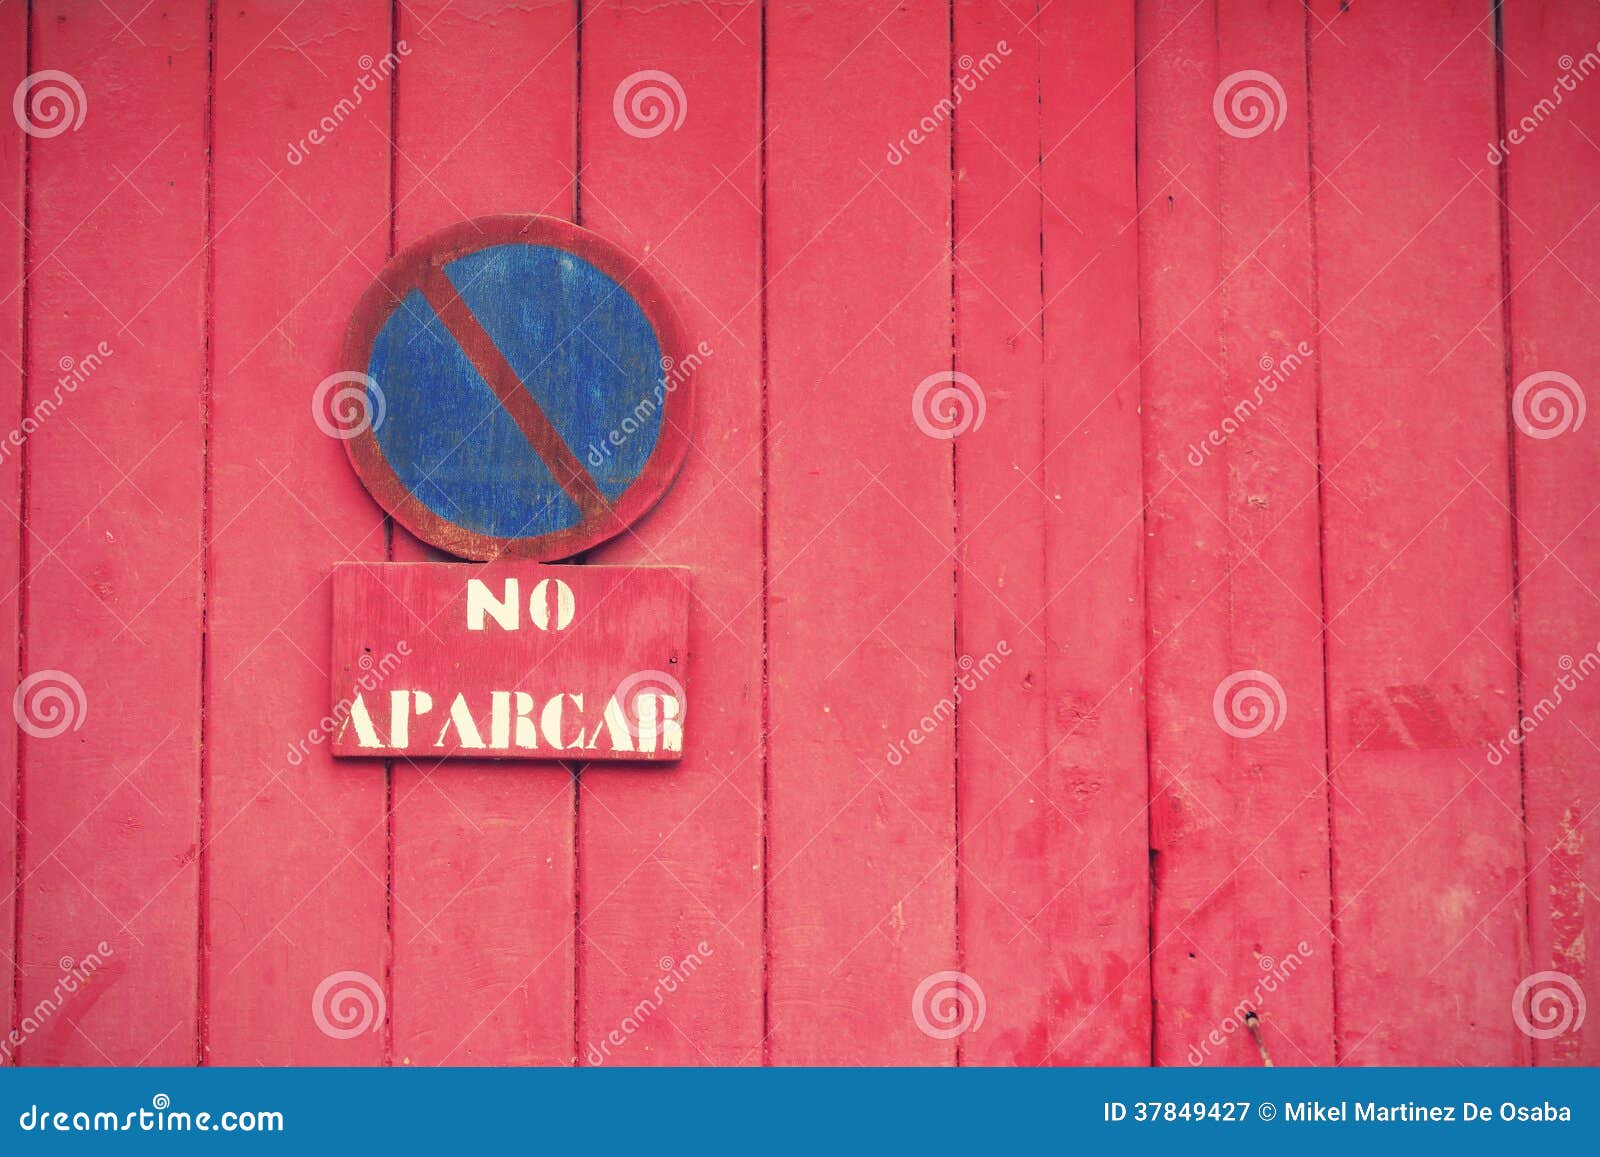 no parking traffic sign on wooden wall